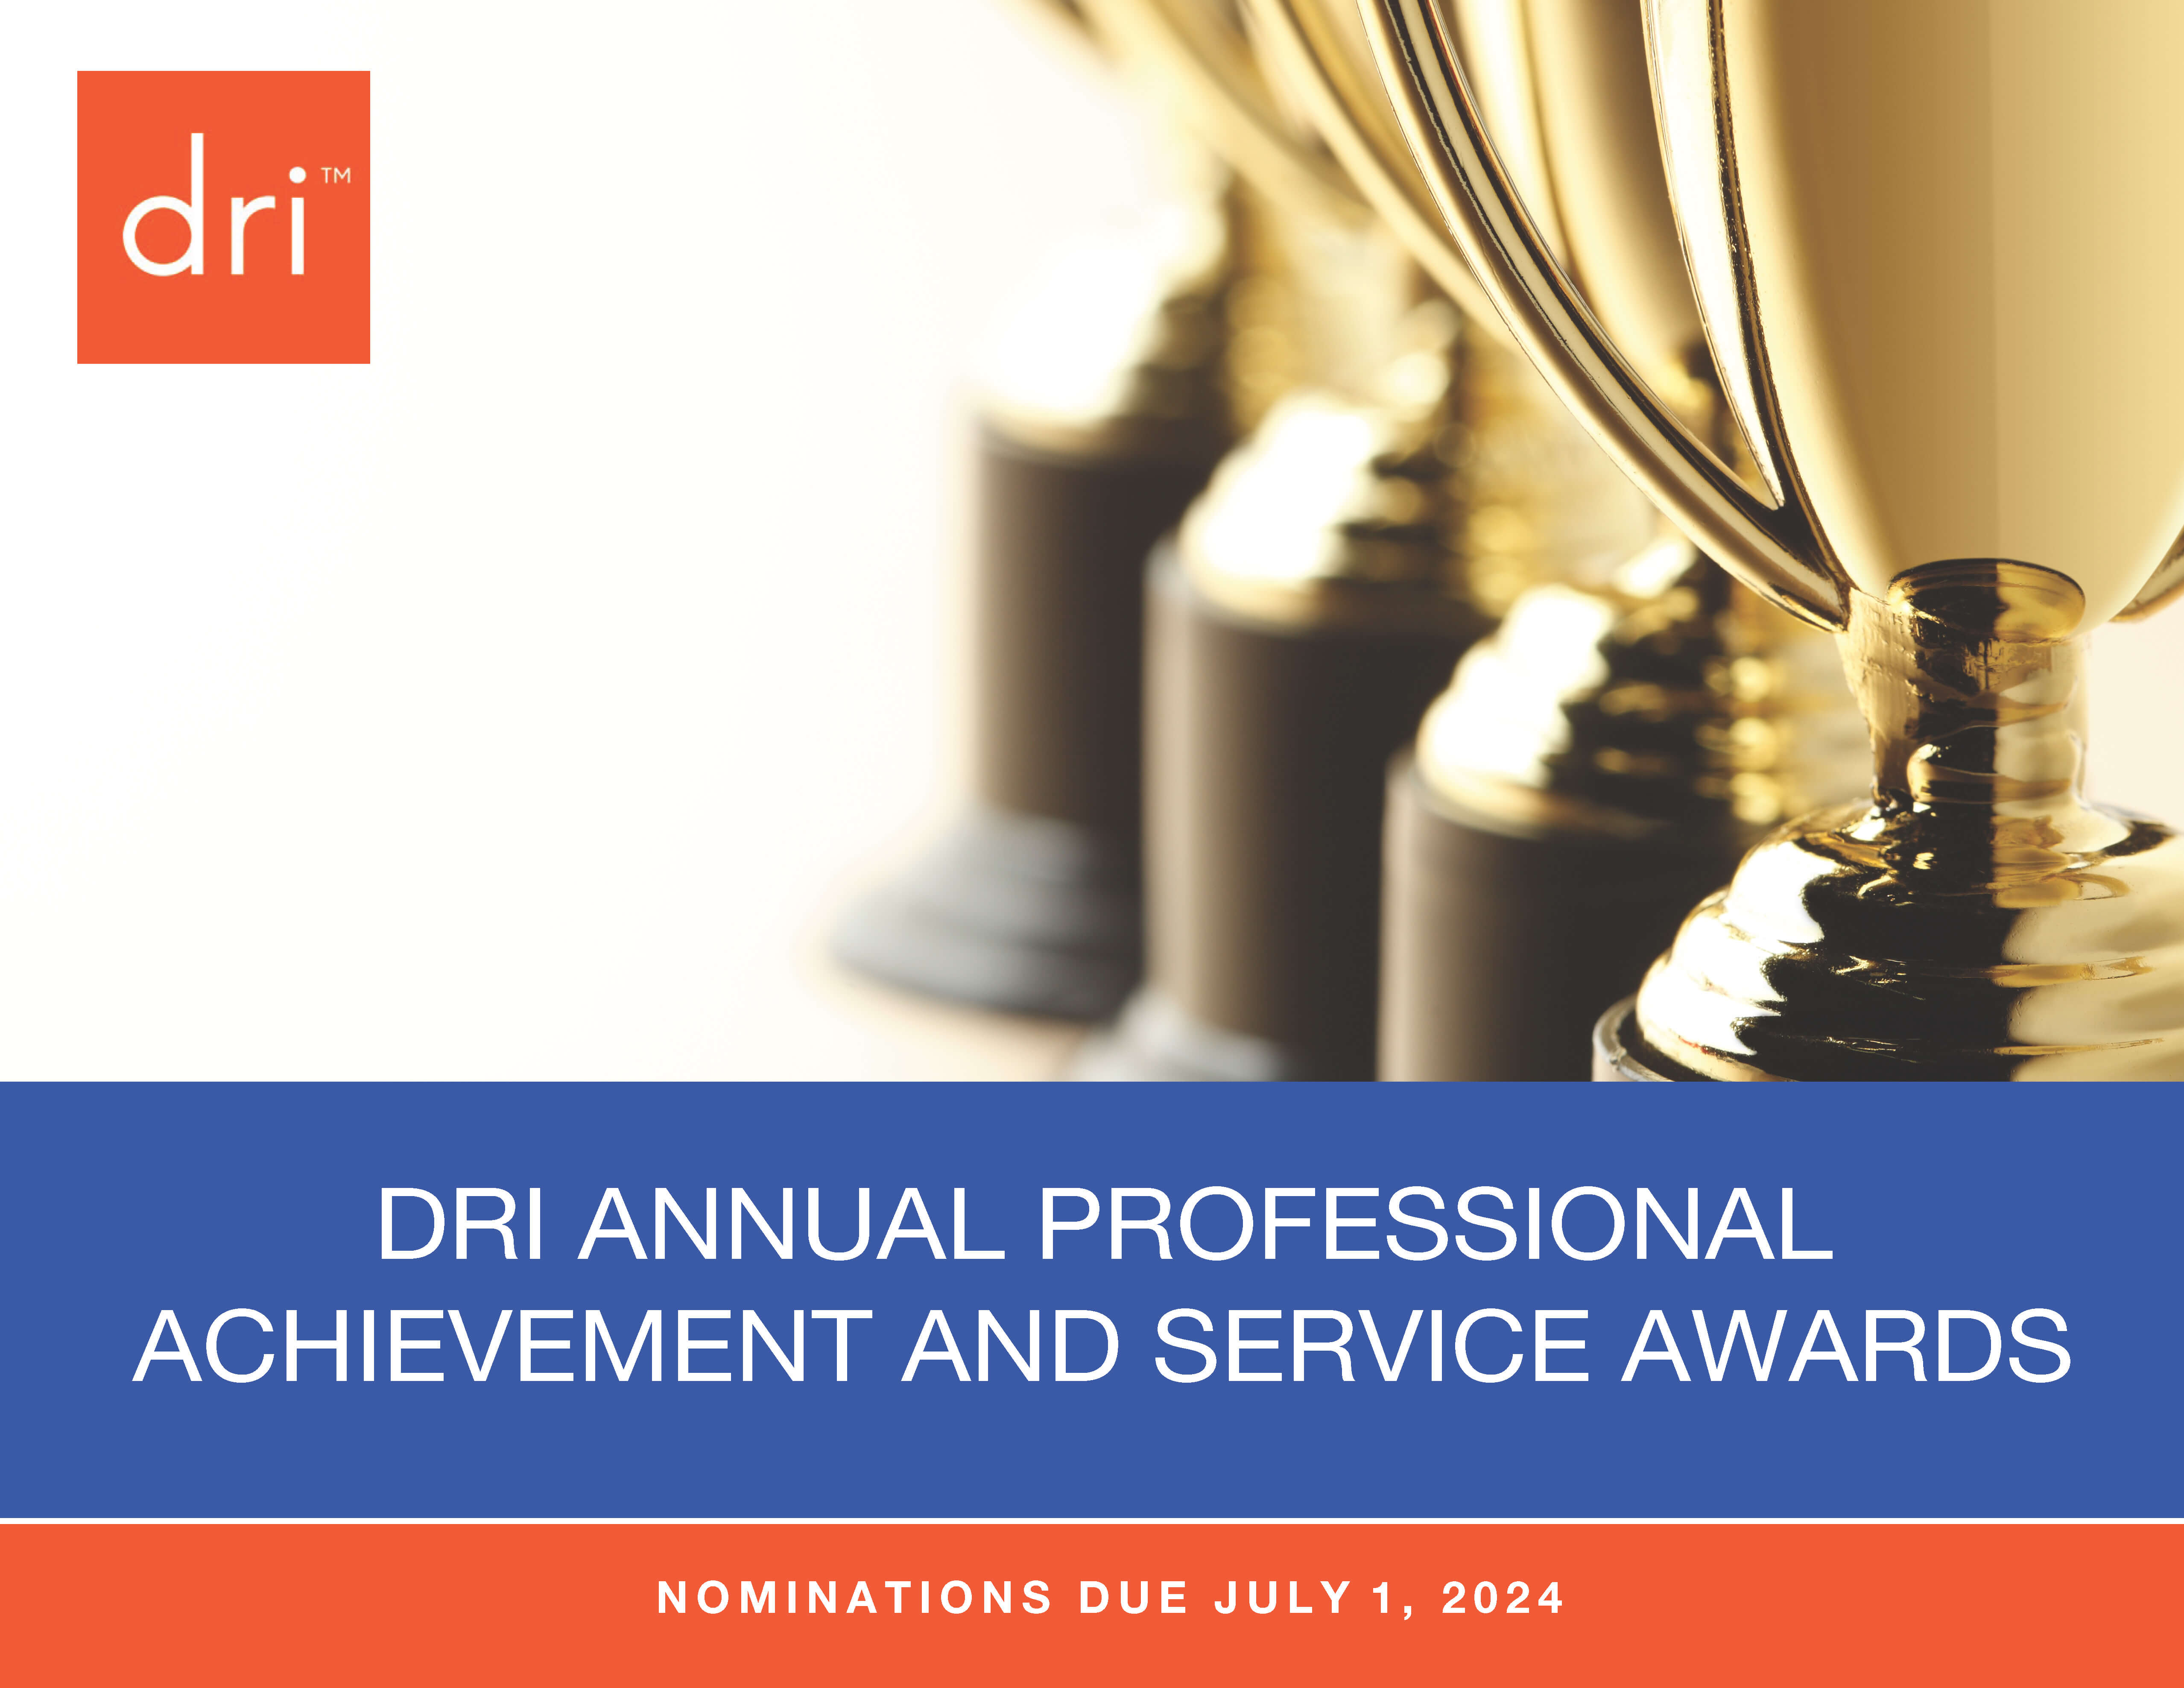 DRI Annual Professional Achievement and Service Awards | Nominations due July 1, 2024